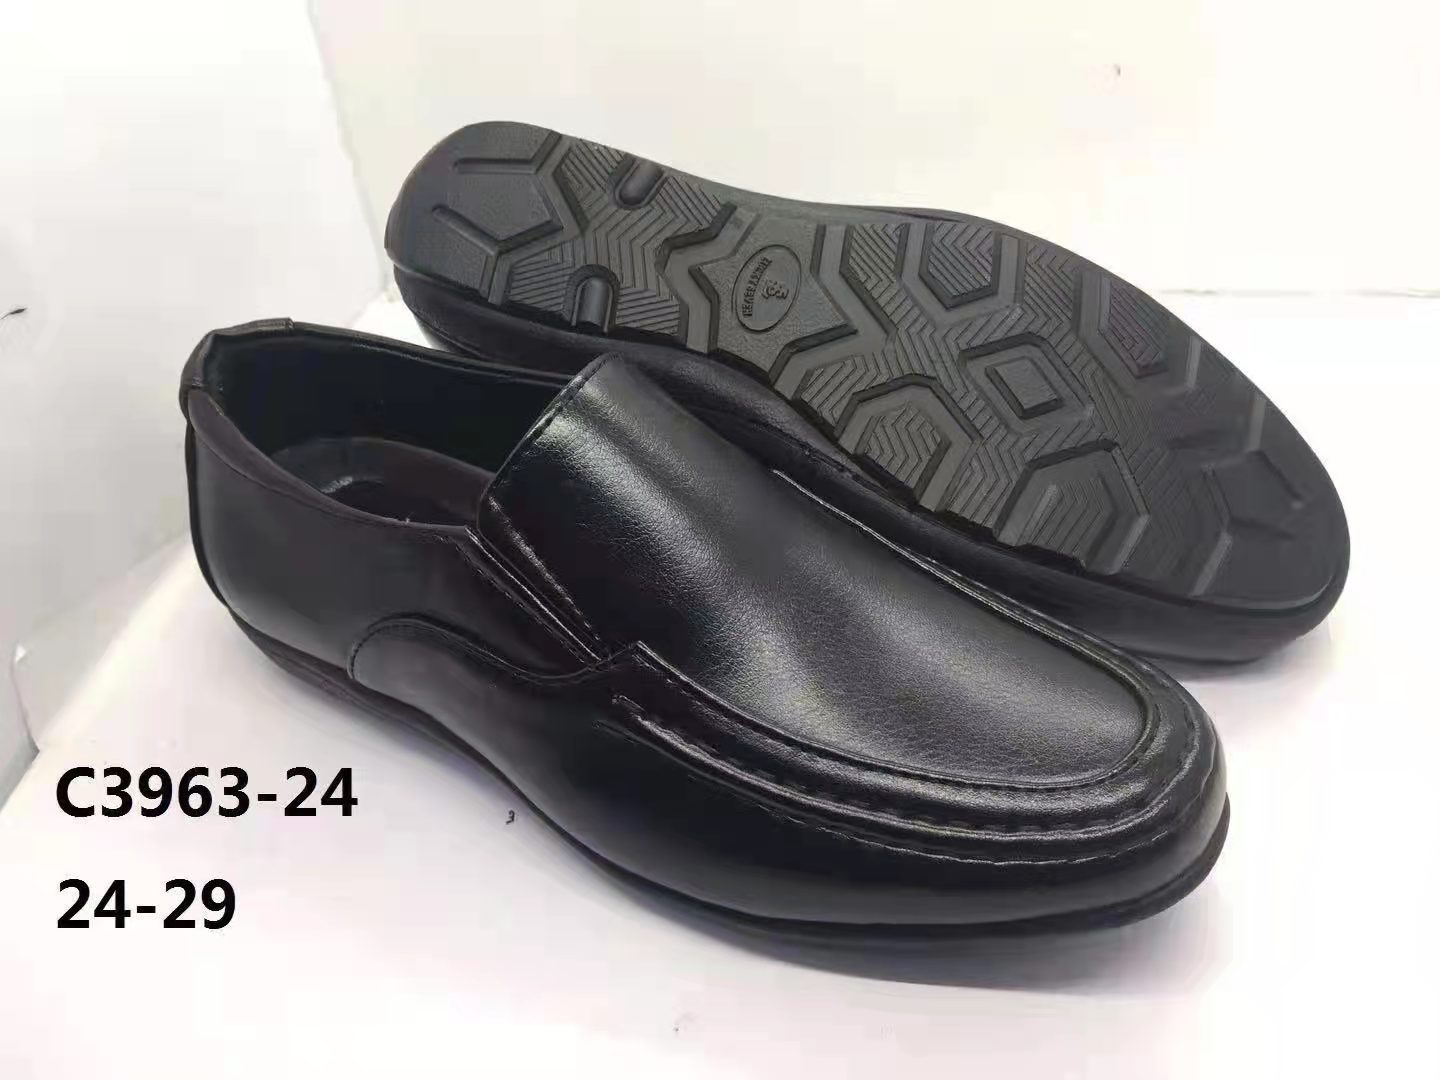 43979 - Mans and boys dress shoes China 